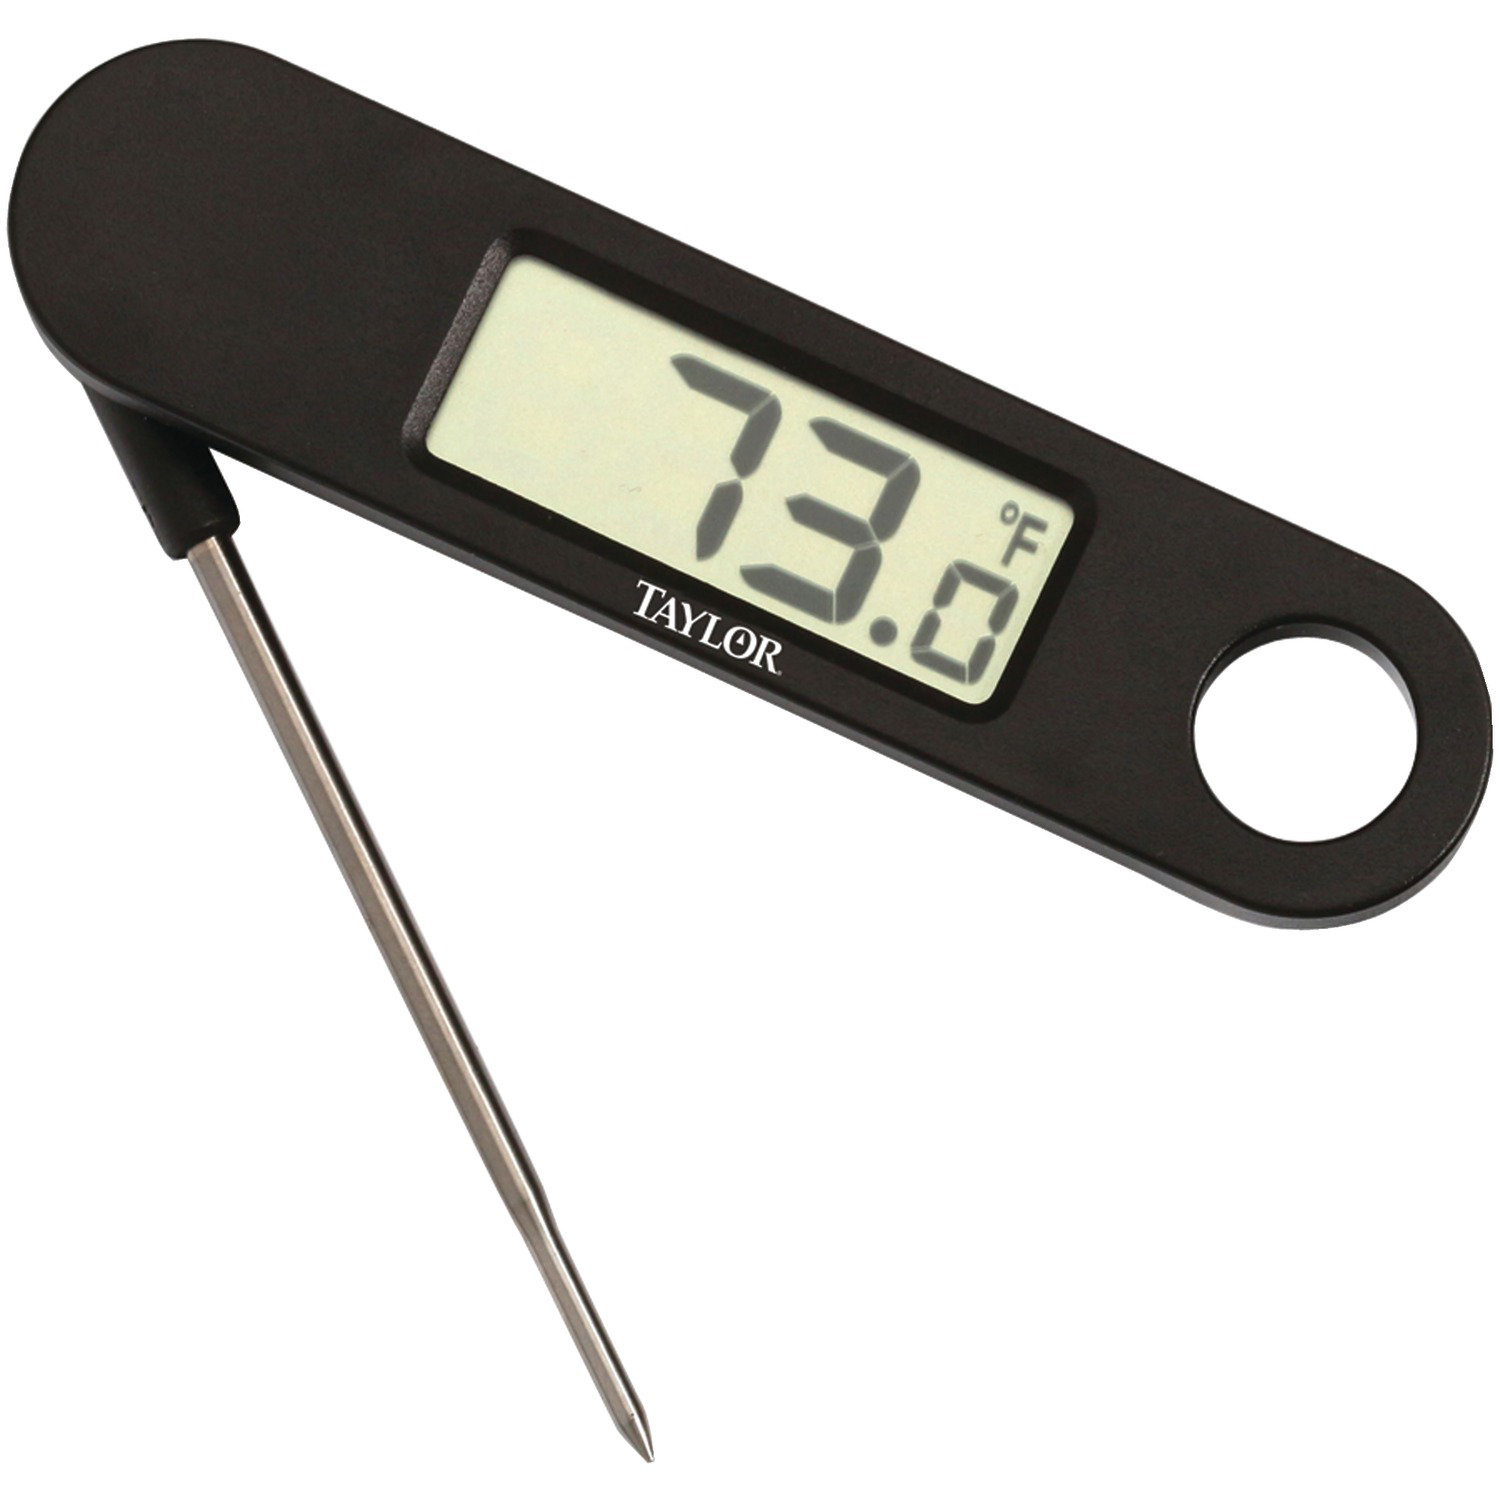 How to Use Taylor Meat Thermometer 